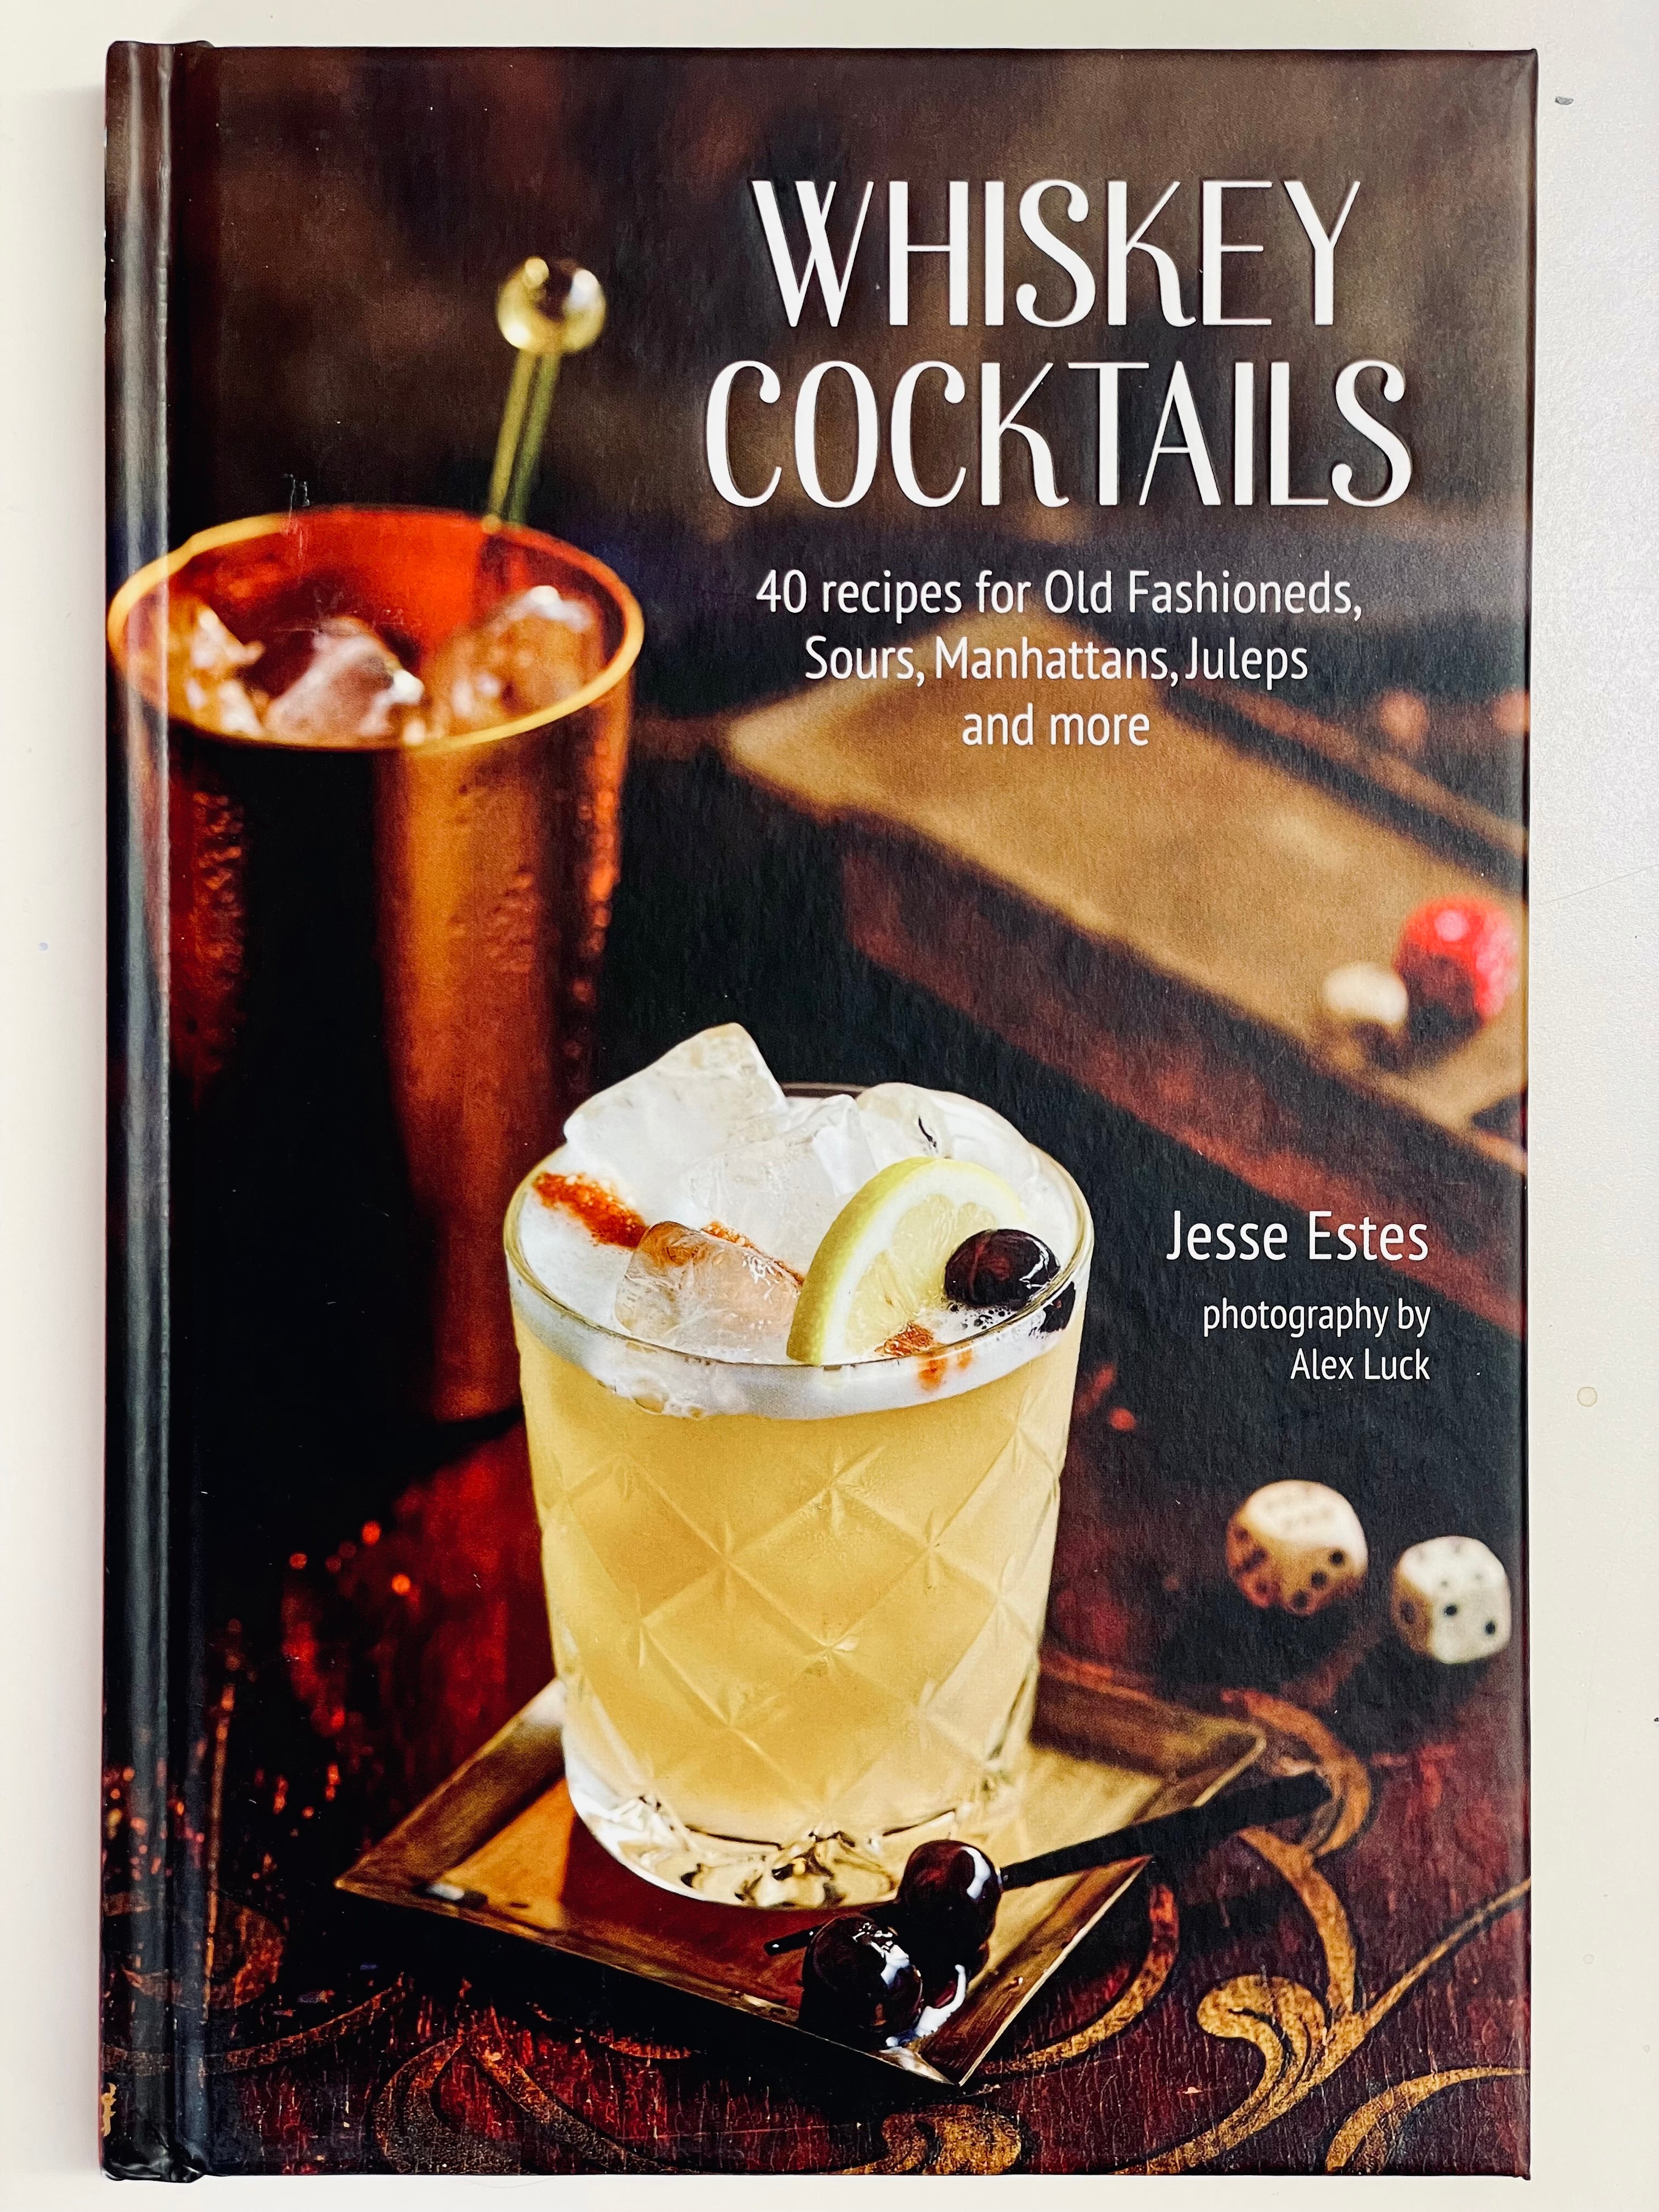 Whiskey Cocktails: Forty Recipes from Old Fashioneds, Sours, Manhattans and more